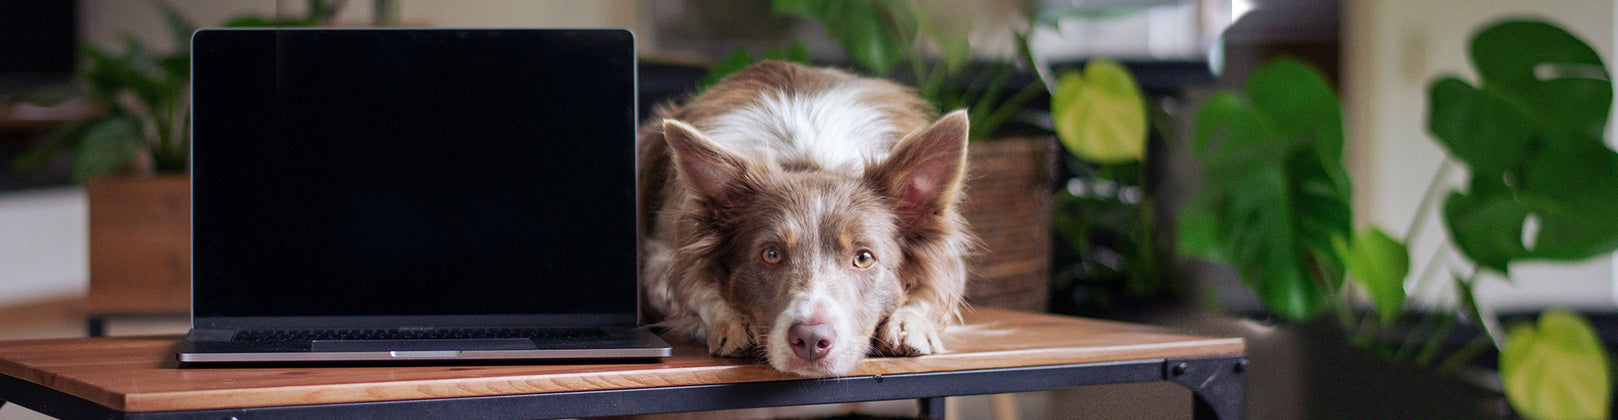 DIY Doggie Daycare: 3 Simple Tips for Keeping Your Pup Busy When You Work from Home